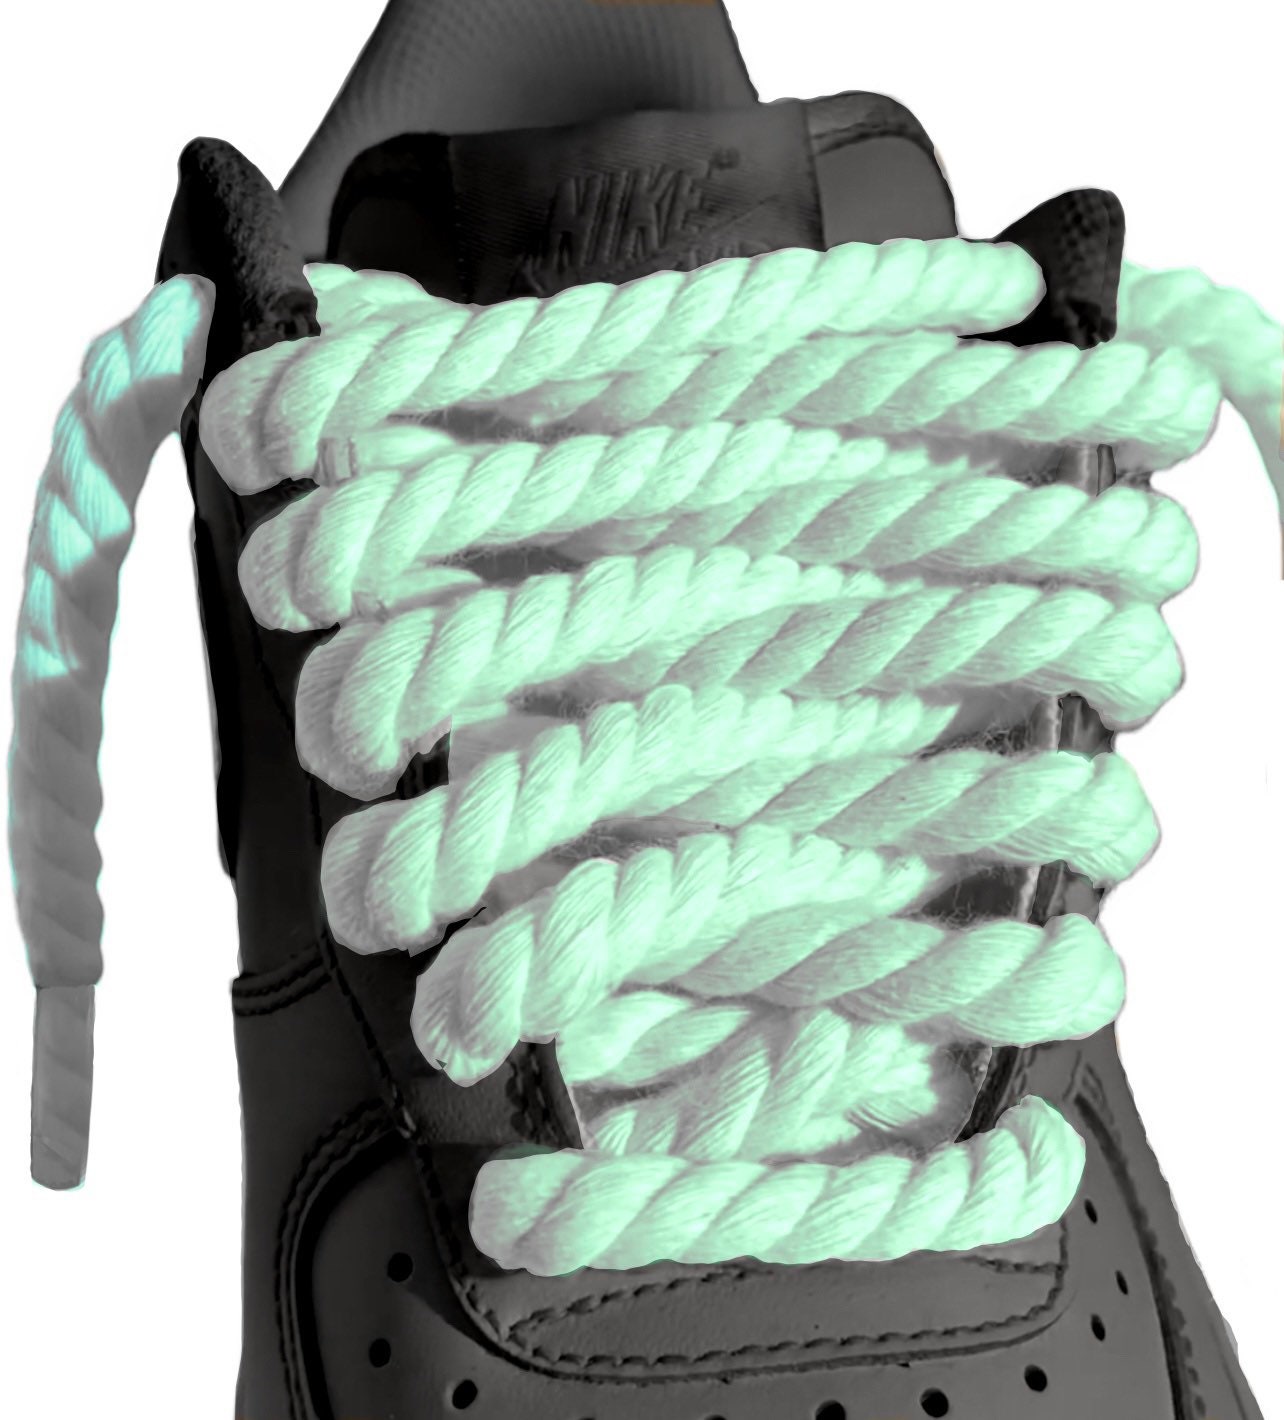 Super Chunky Thick Braided Rope AF1 Shoelaces for Air Force 1, Dunks,  Jordans & More -  Norway